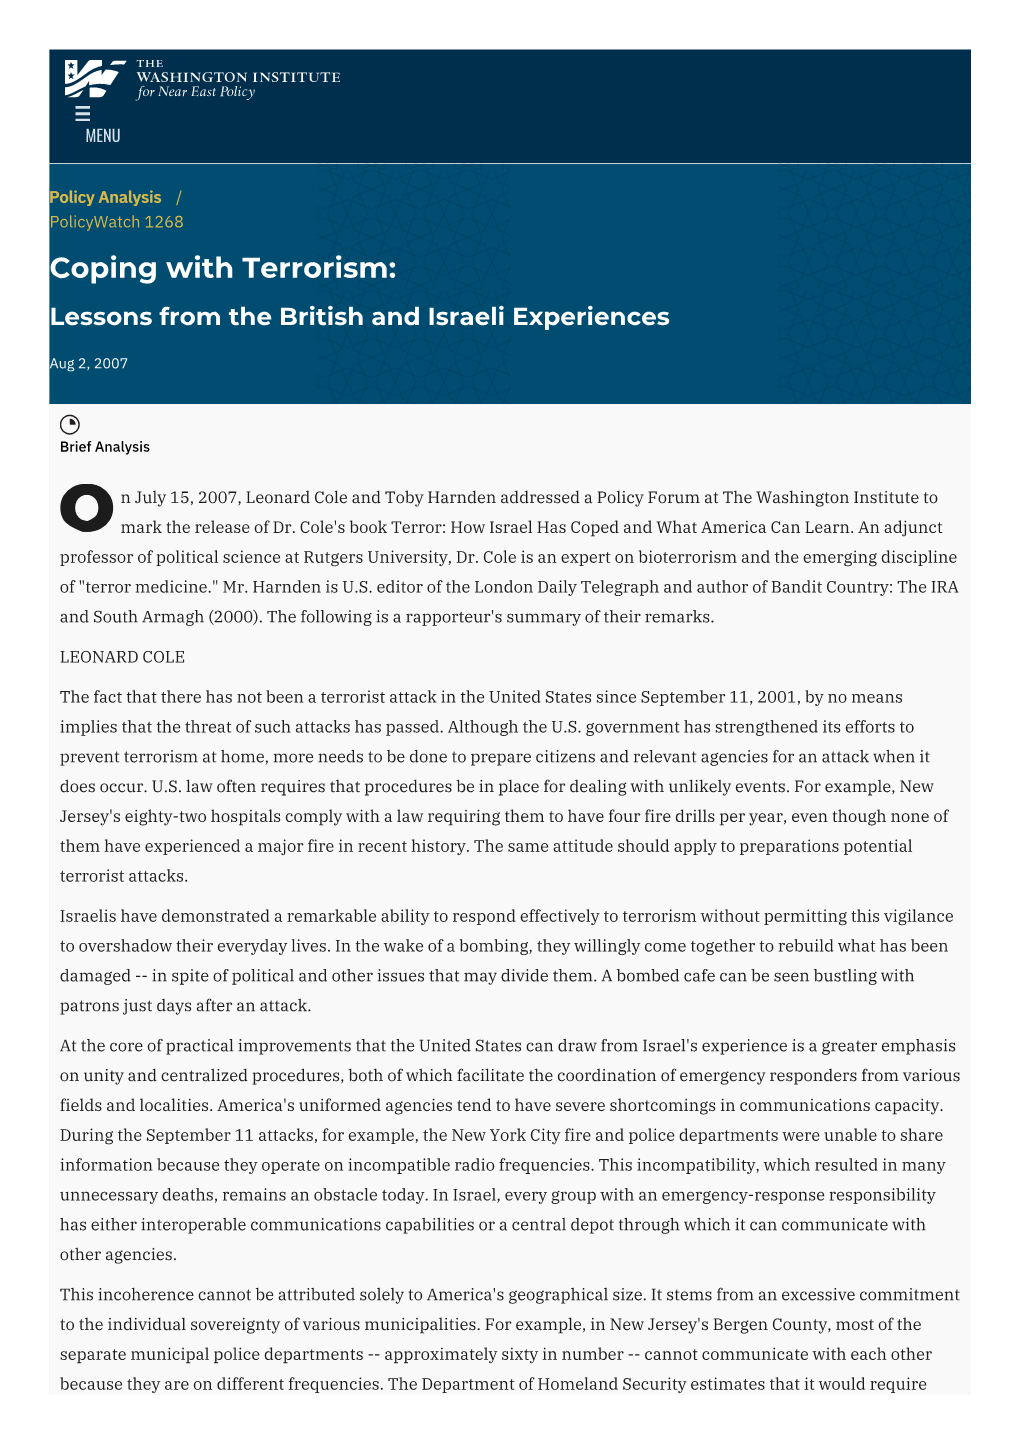 Coping with Terrorism: Lessons from the British and Israeli Experiences